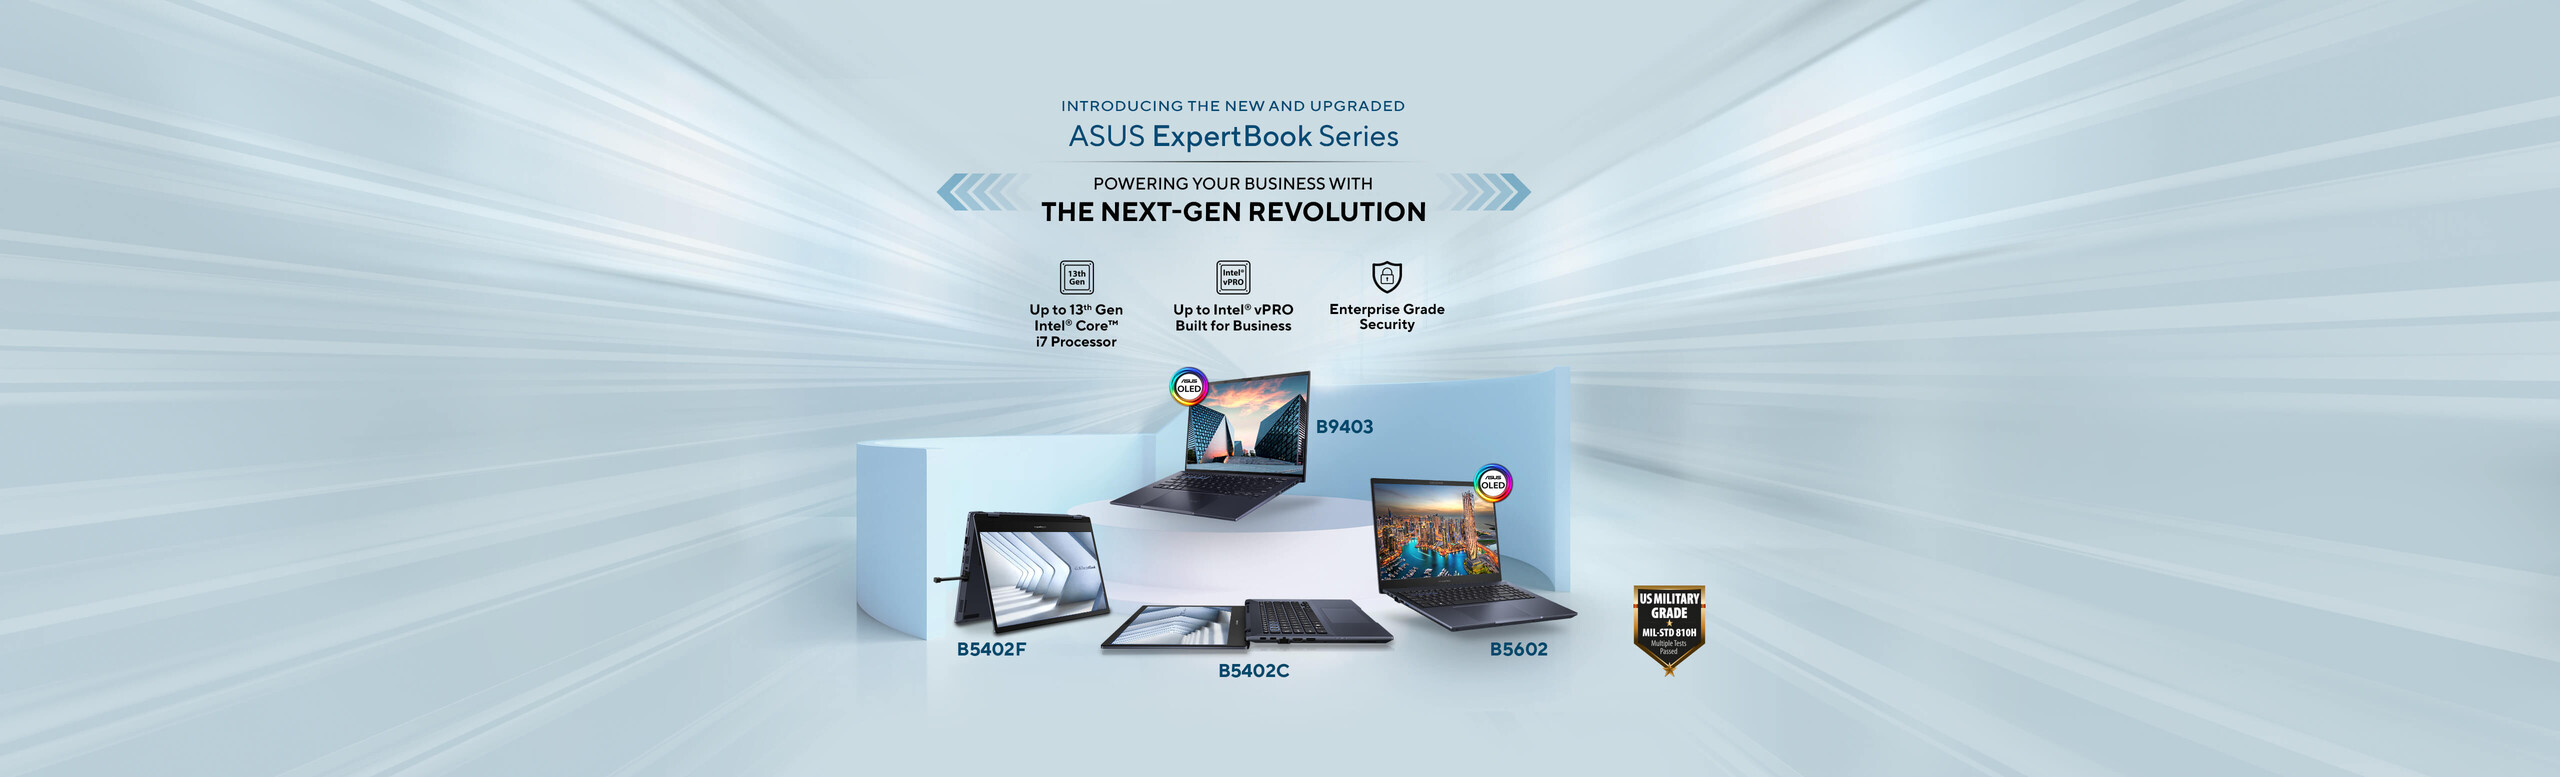 ASUS Expertbook Launch - OLED laptops